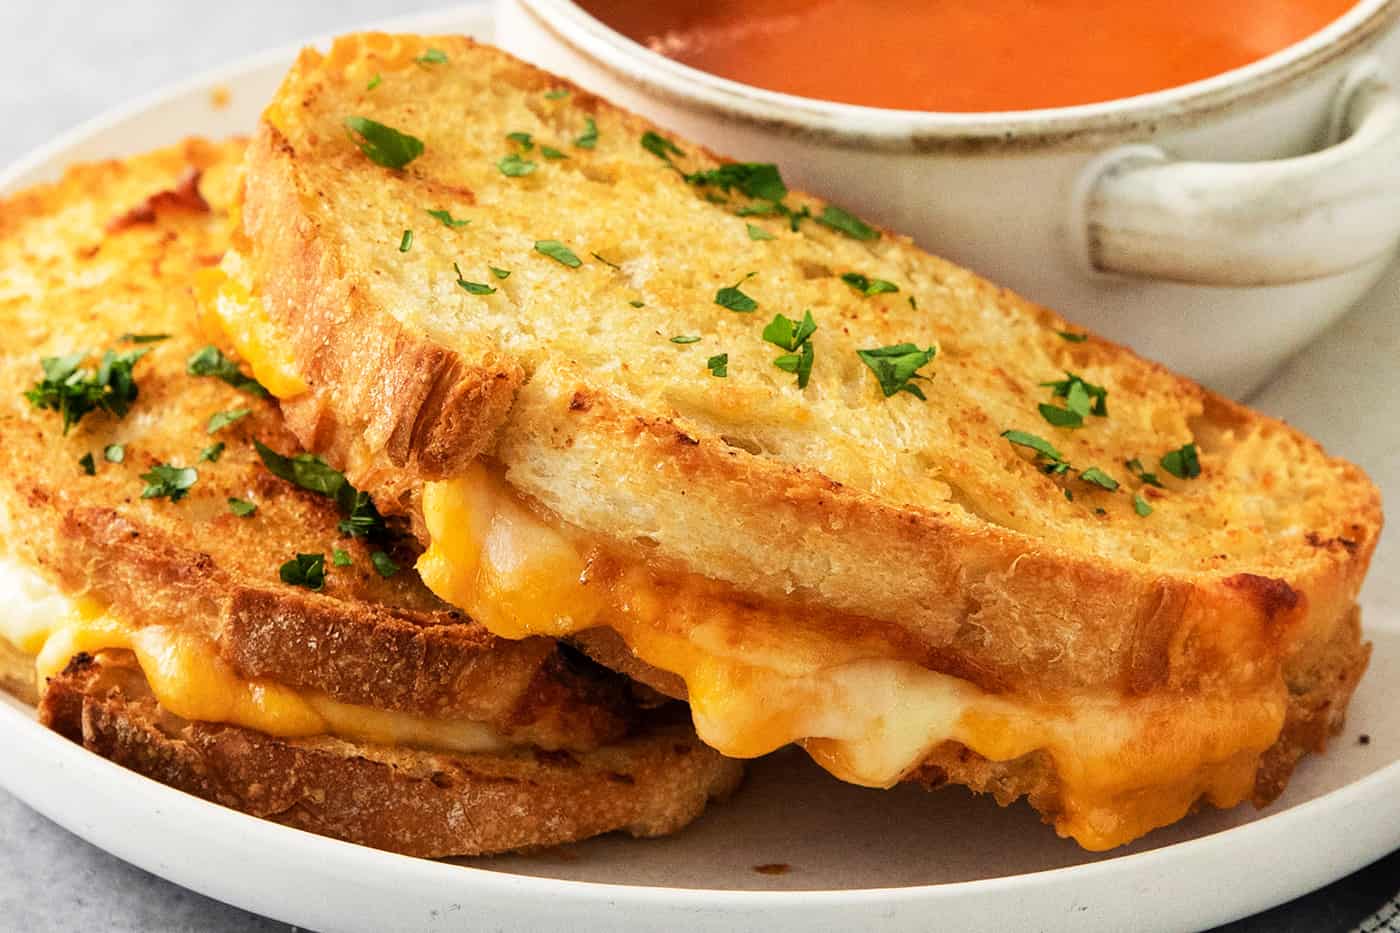 Air fryer grilled cheese sandwiches are shown on a plate along with a bowl of tomato soup.